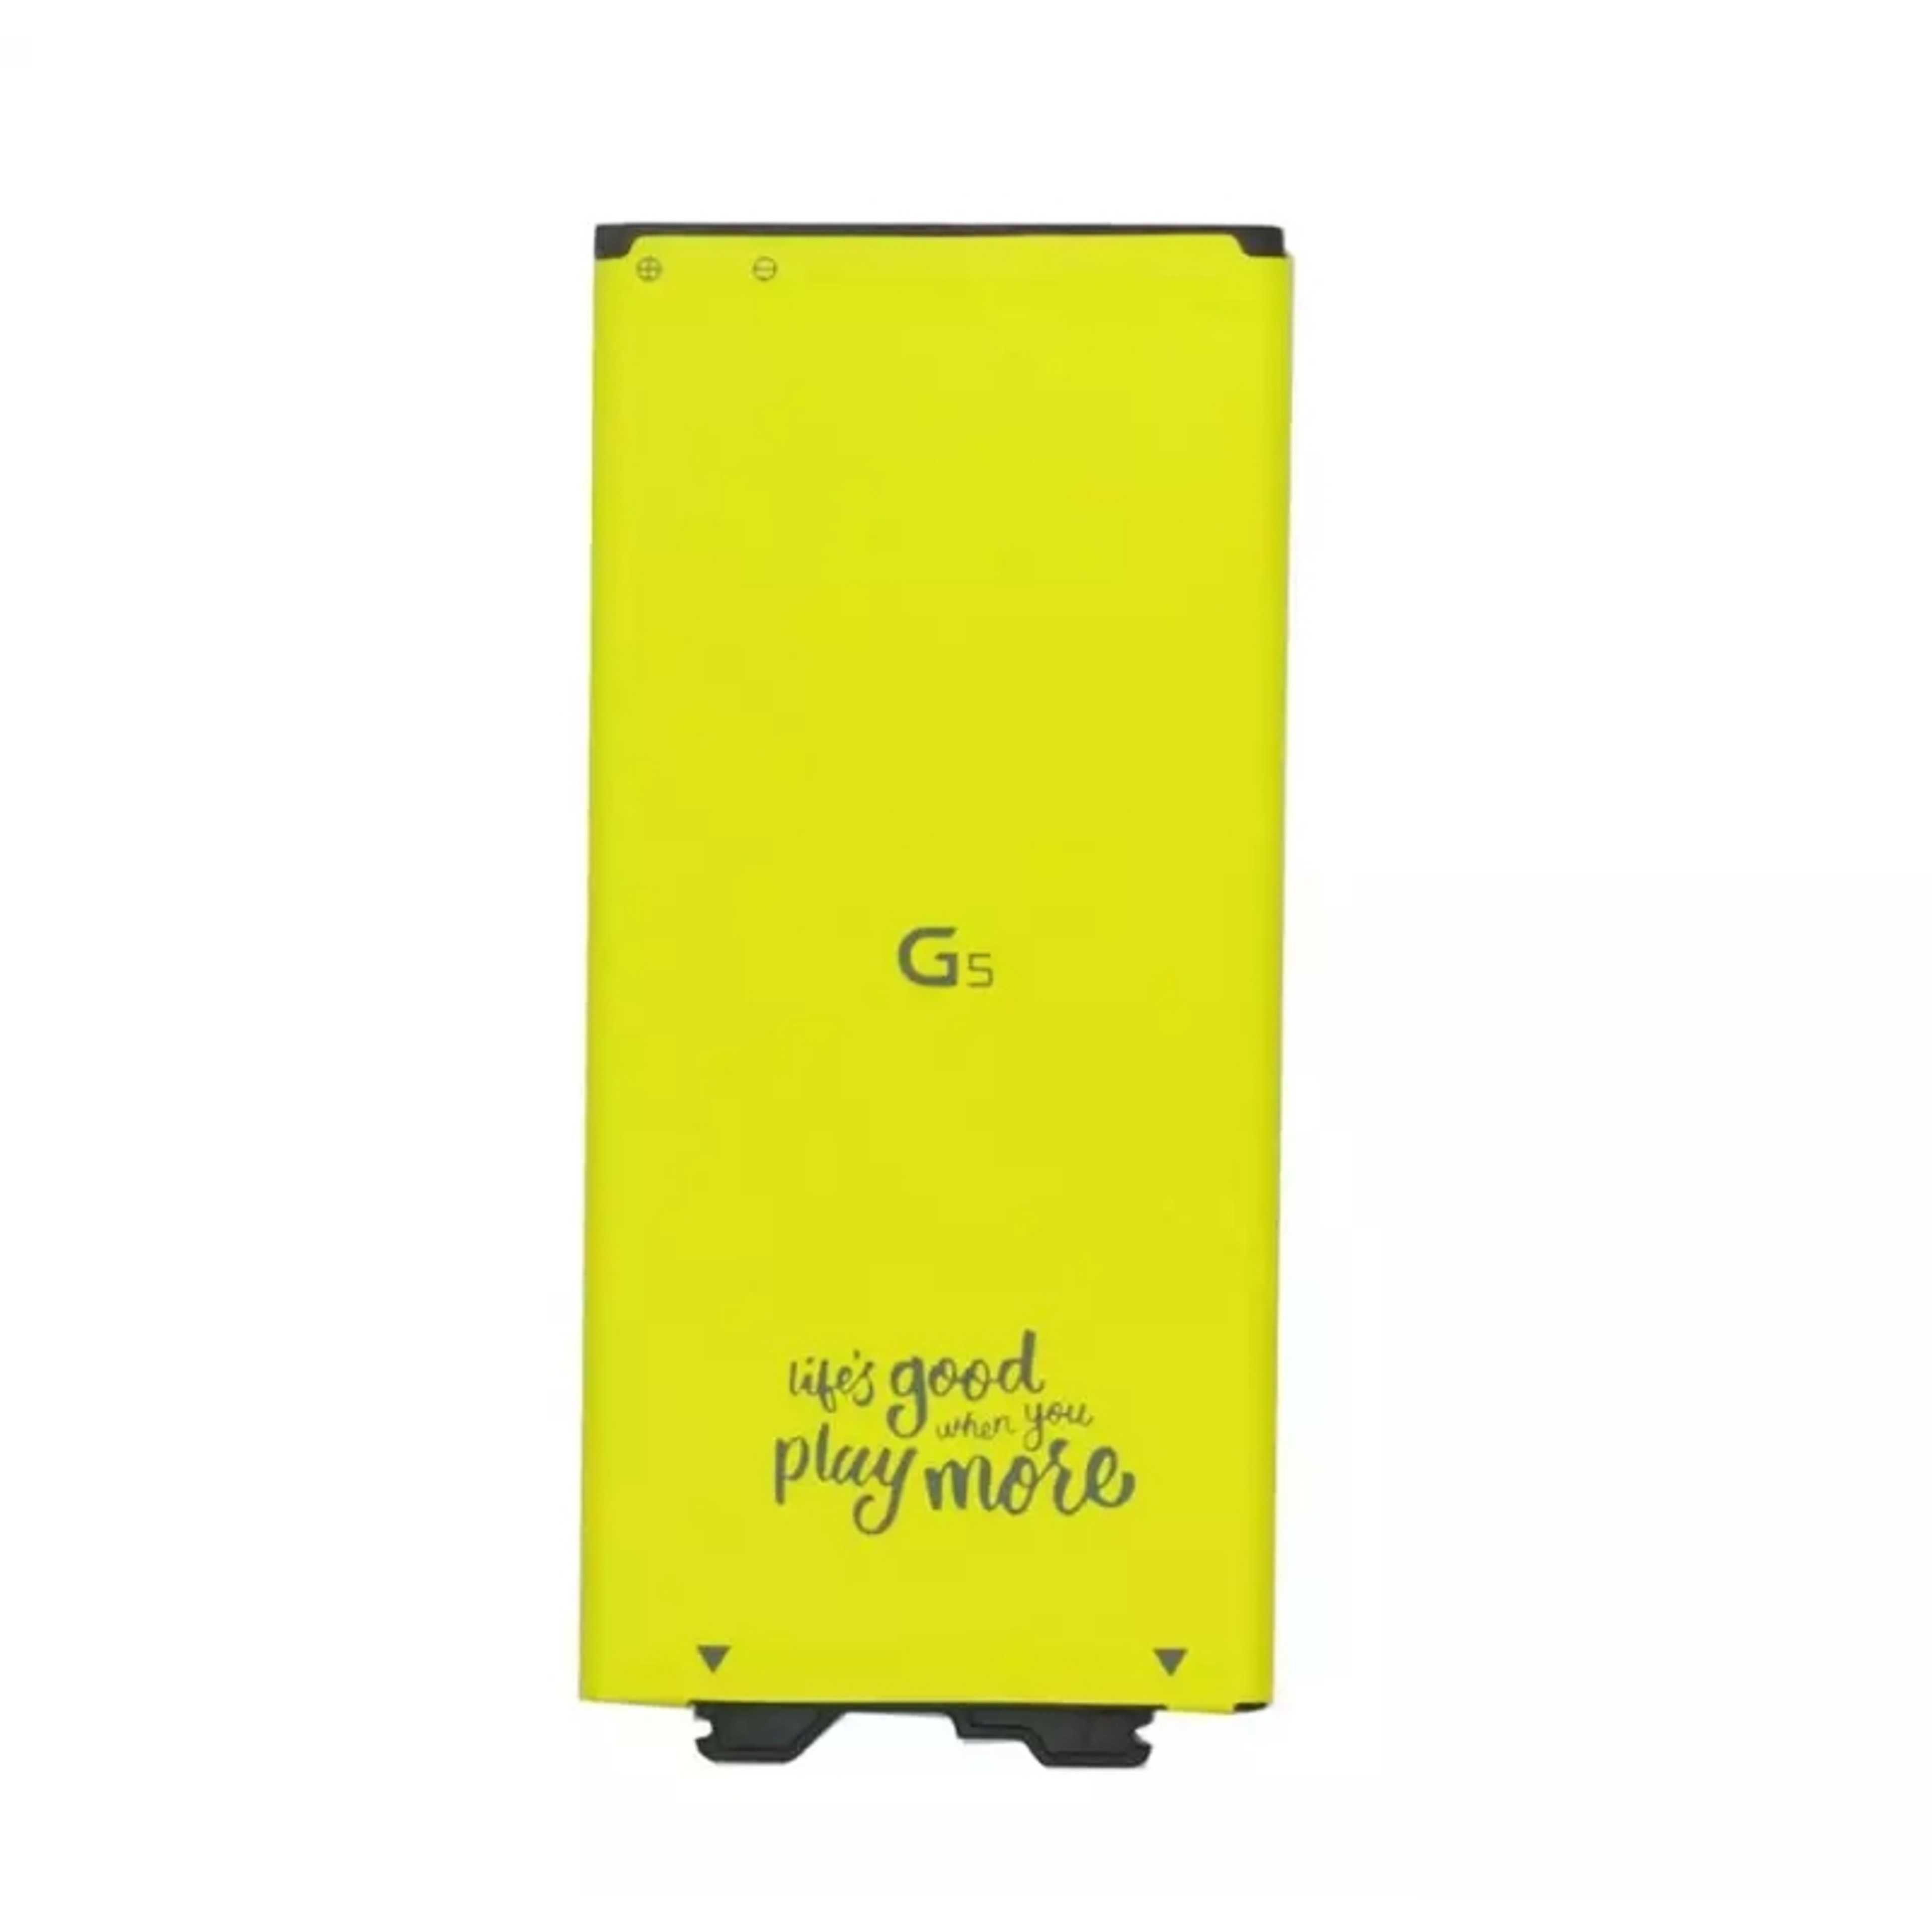 2800mAh BL-42D1F Replacement Battery For LG G5 VS987 US992 H820 H840 H850 H830 H831 H868 F700S F700K H960 H860N LS992